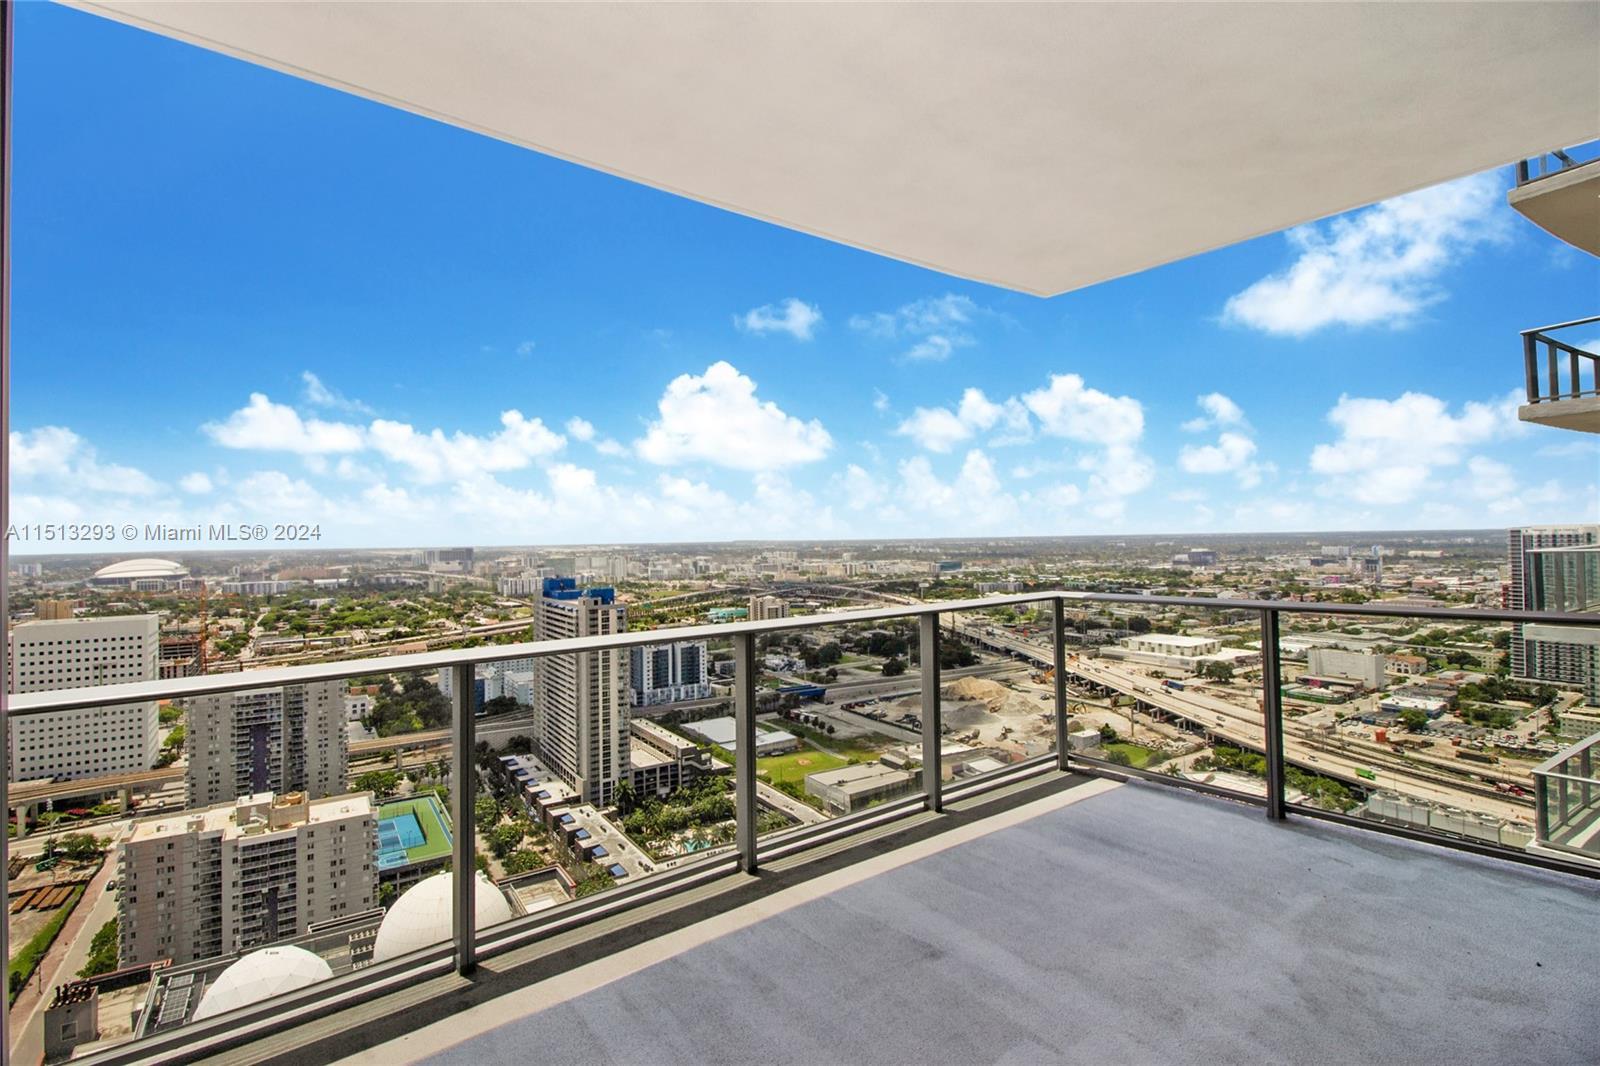 2 beds plus den+ 3 baths. PARAMOUNT features unparalleled views and the most amenities building in t